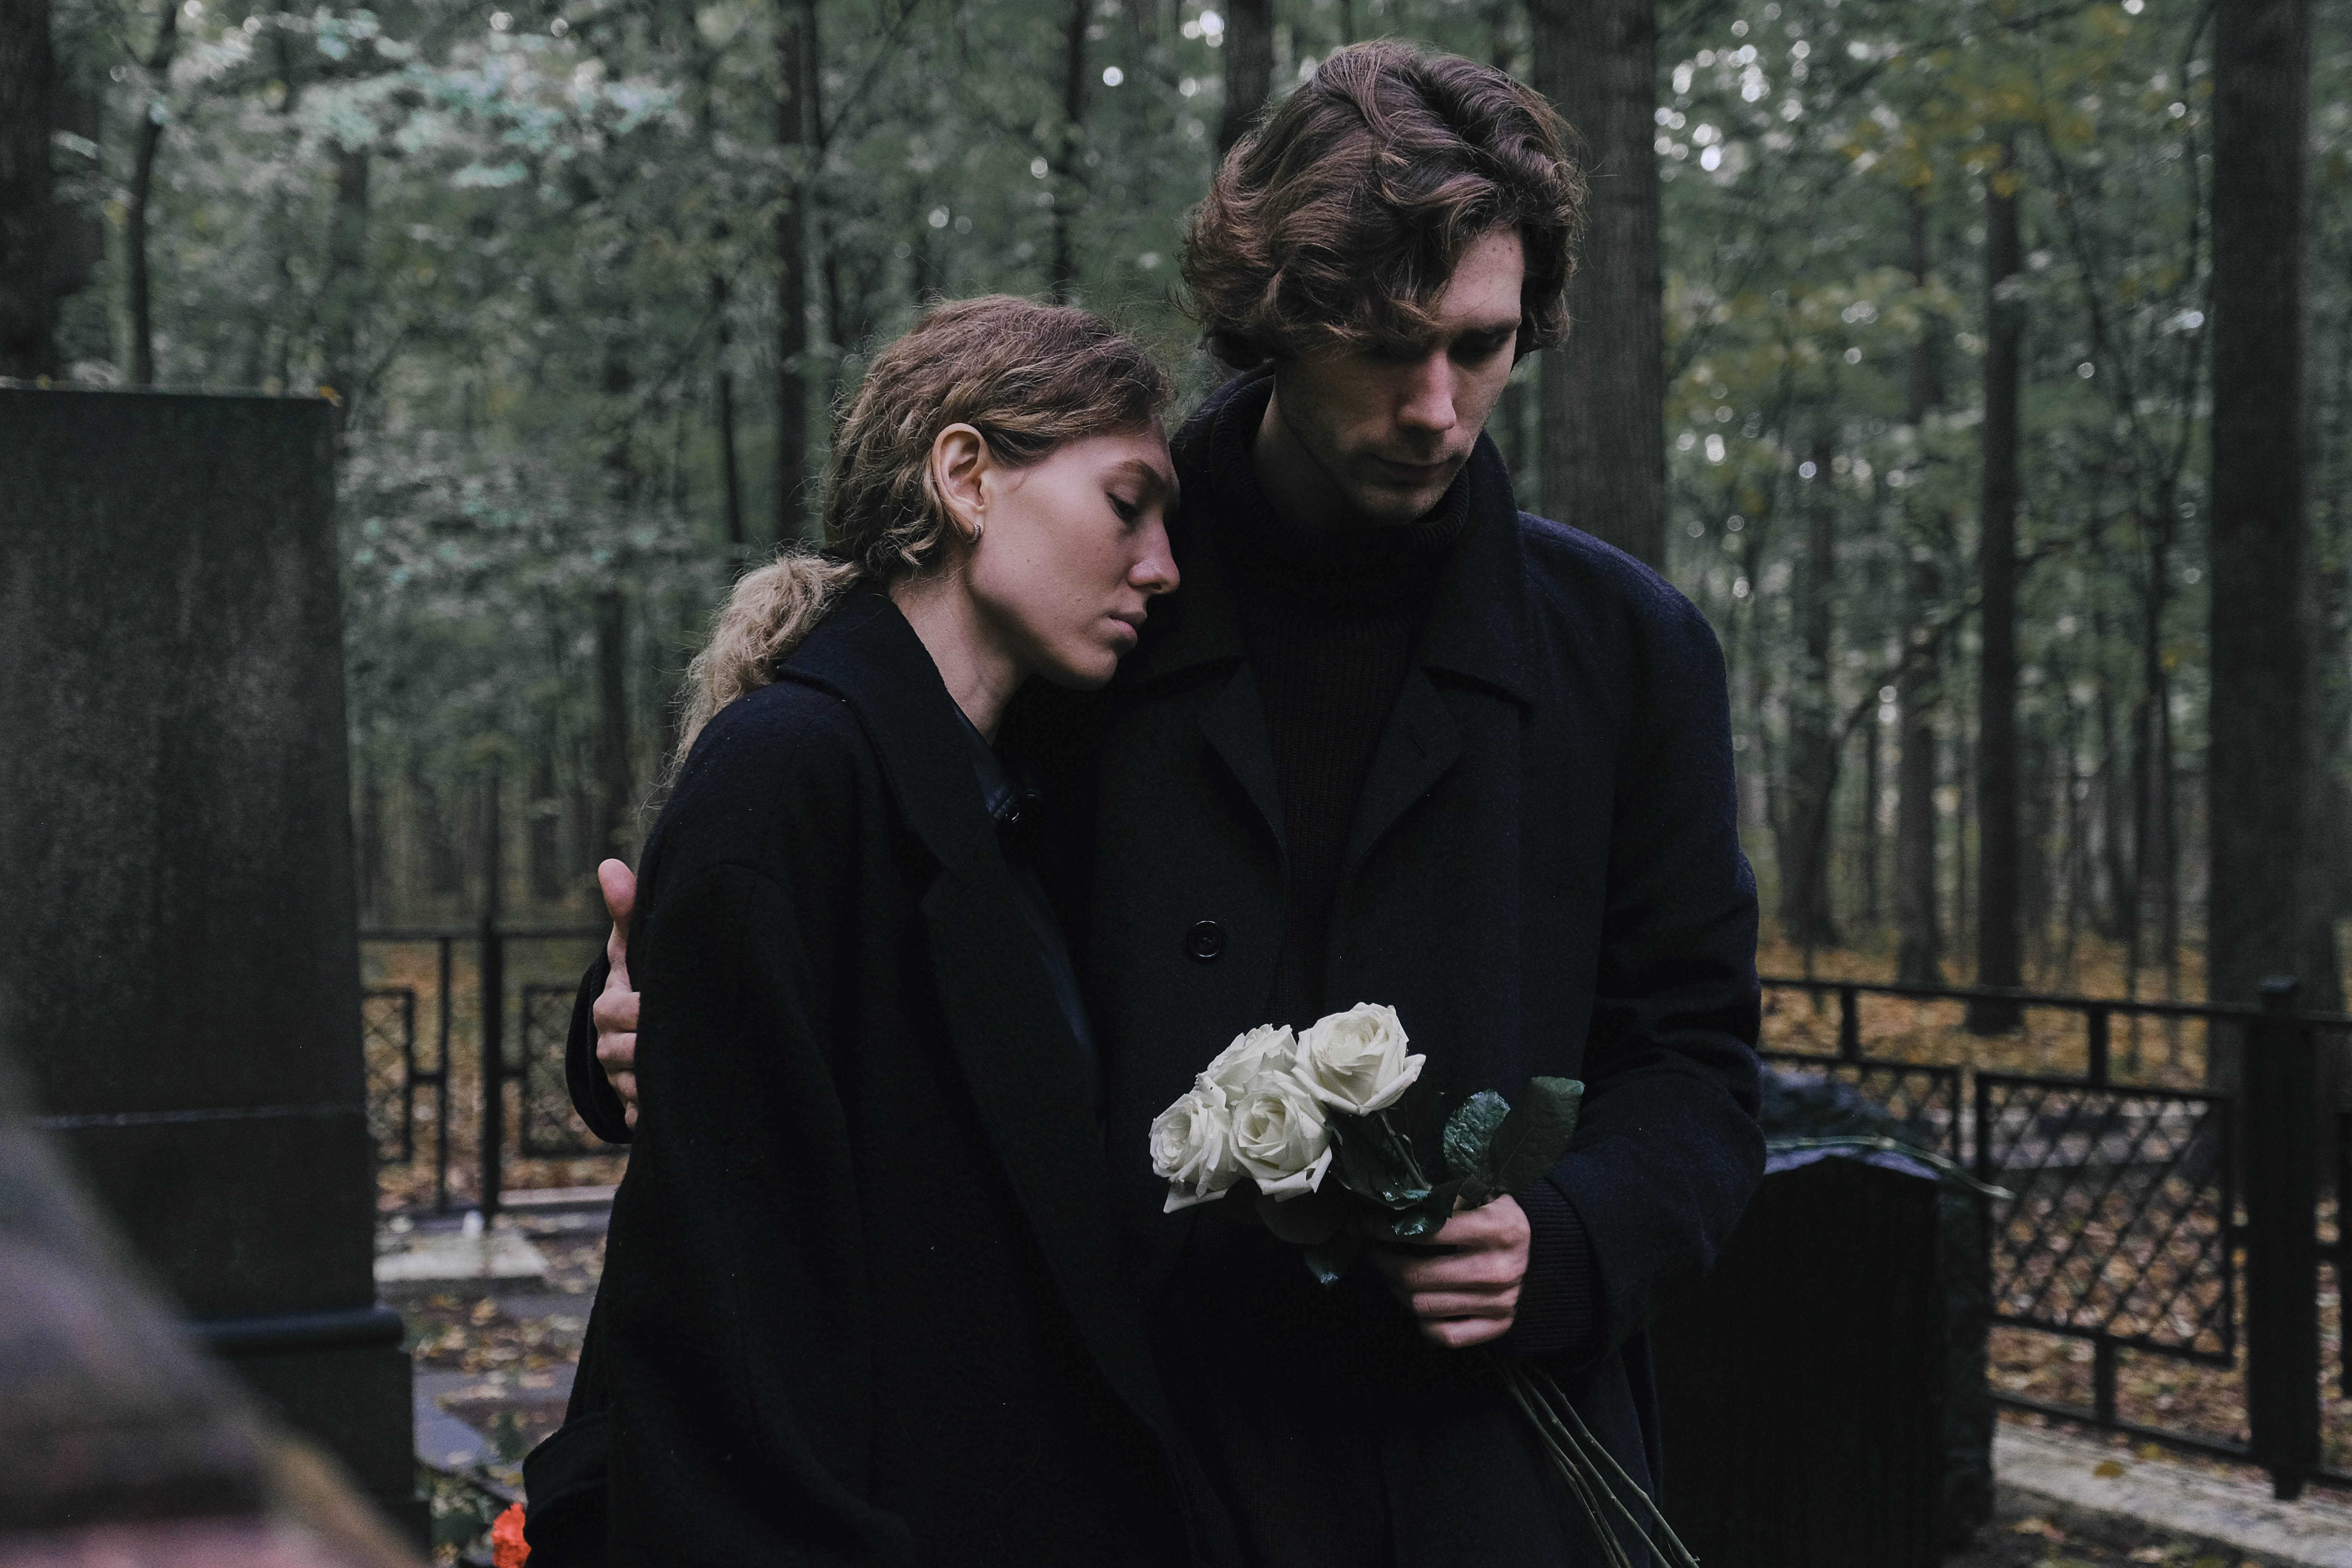 Young couple man and woman mourn at the cemetery for the loss | Source: Getty Images